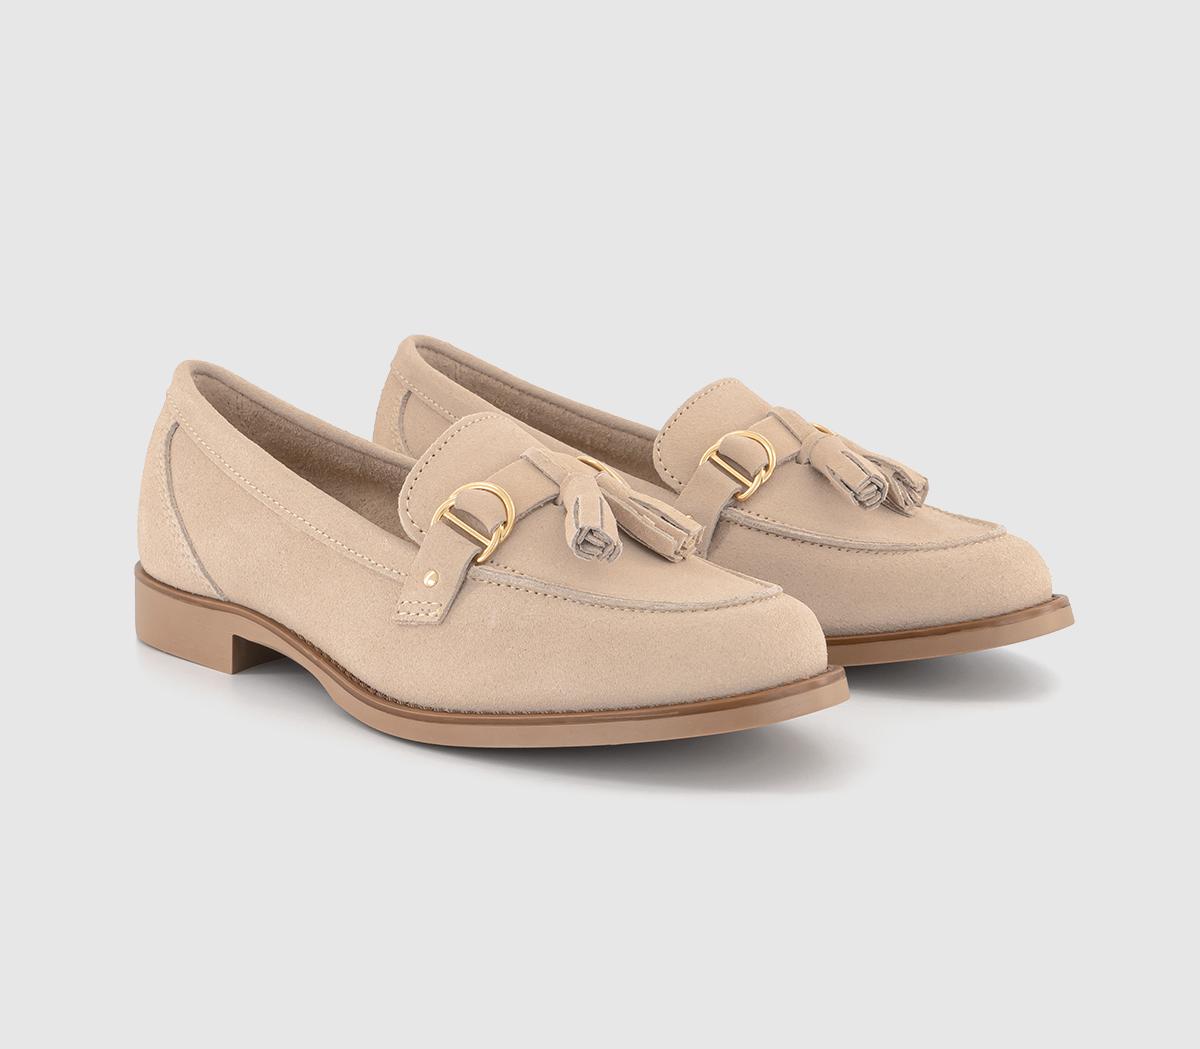 OFFICE Womens Feels Leather Trim Tassel Loafers Blush Suede Natural, 5